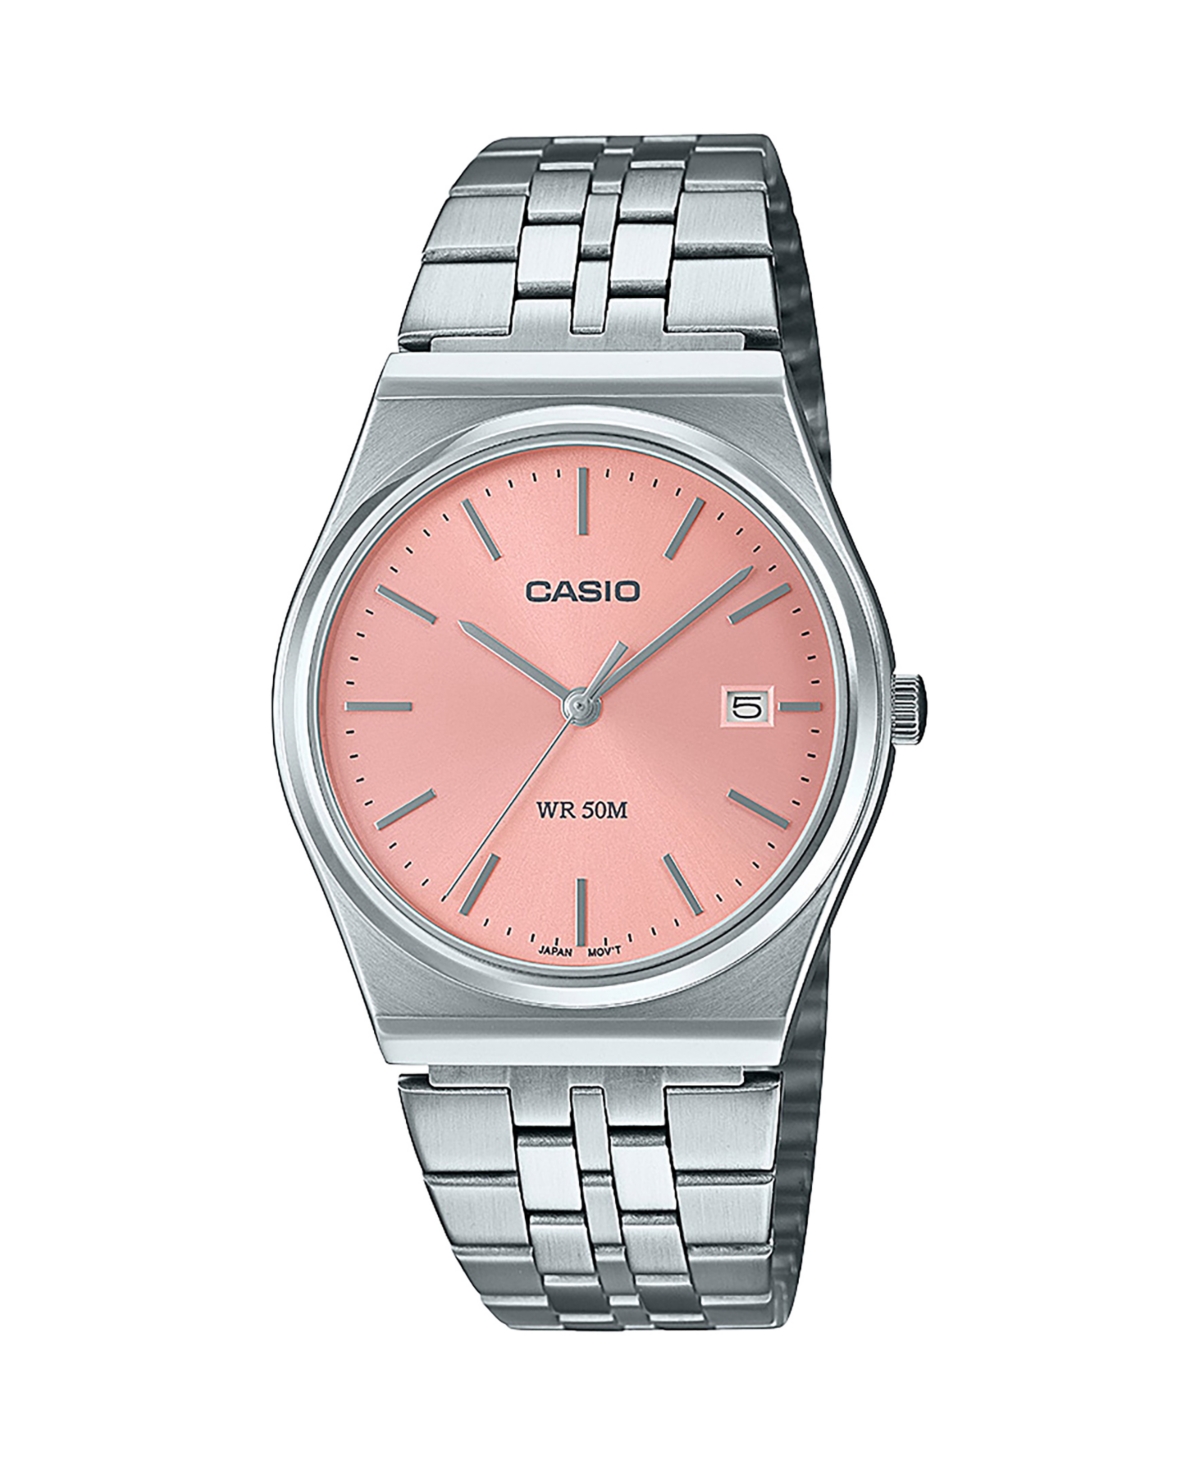 Casio Men's Analog Silver-Tone Stainless Steel Watch, 35mm, MTPB145D-4VT - Silver